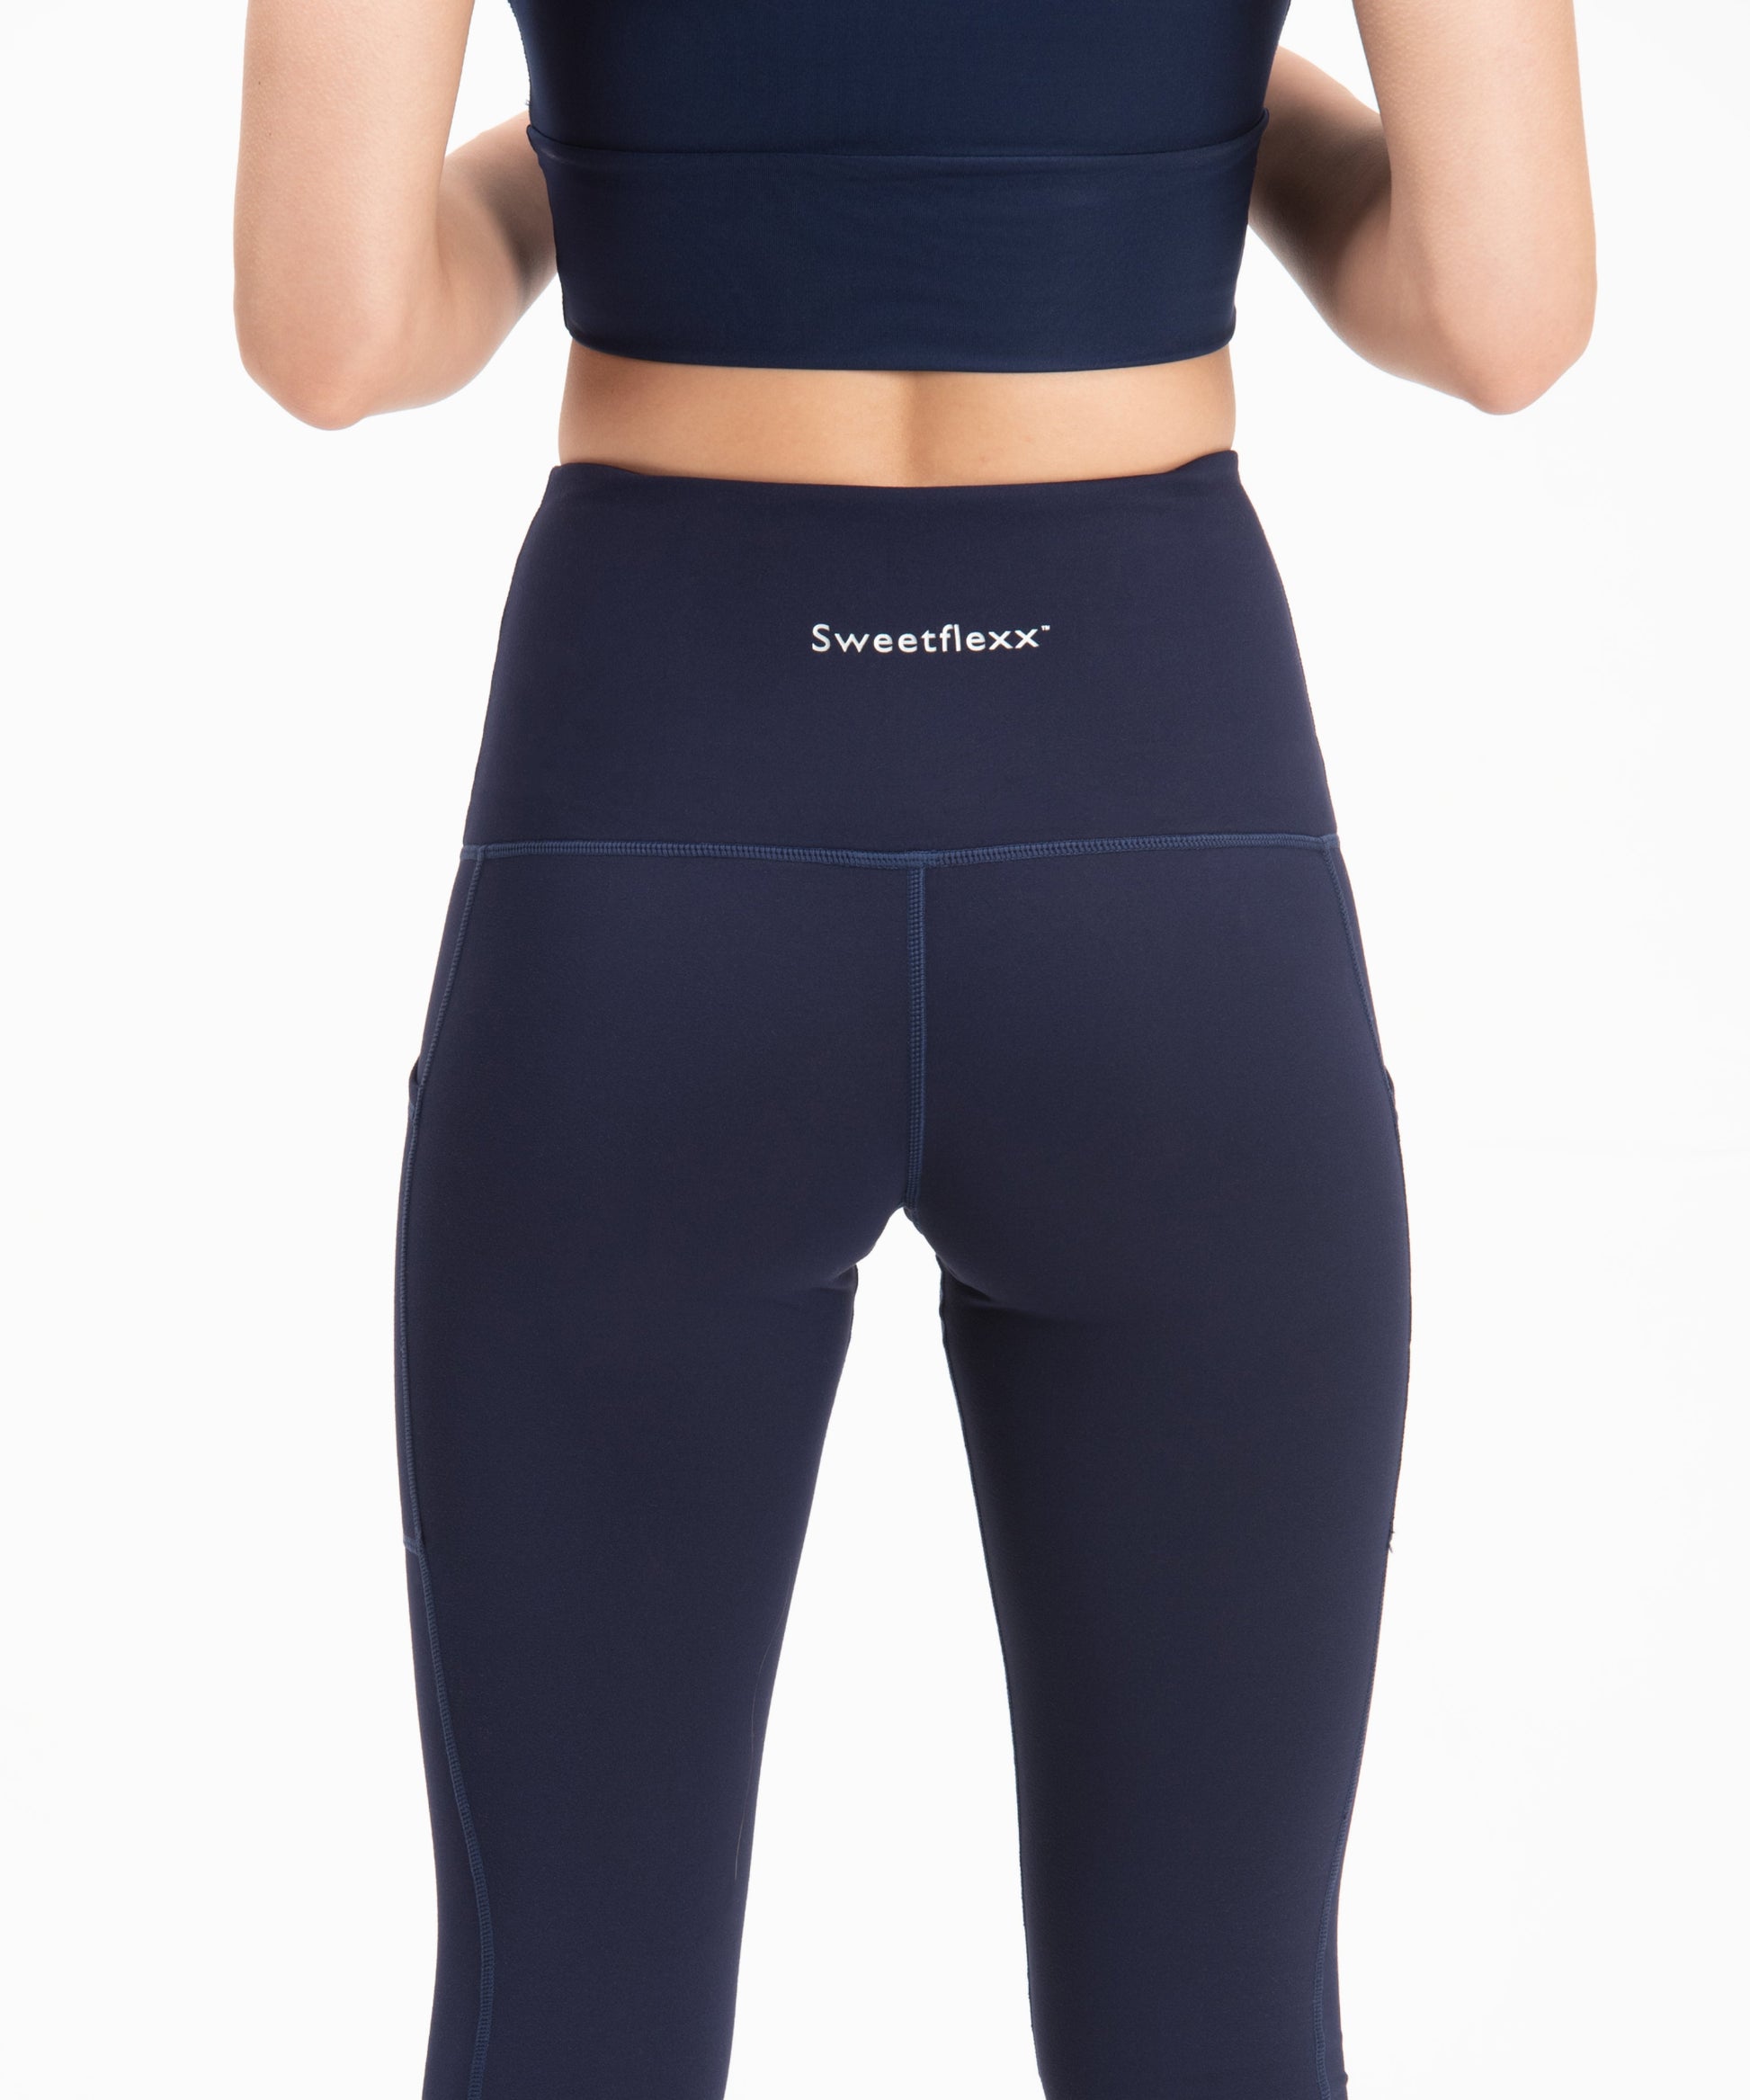 What are resistance leggings? – Sweetflexx